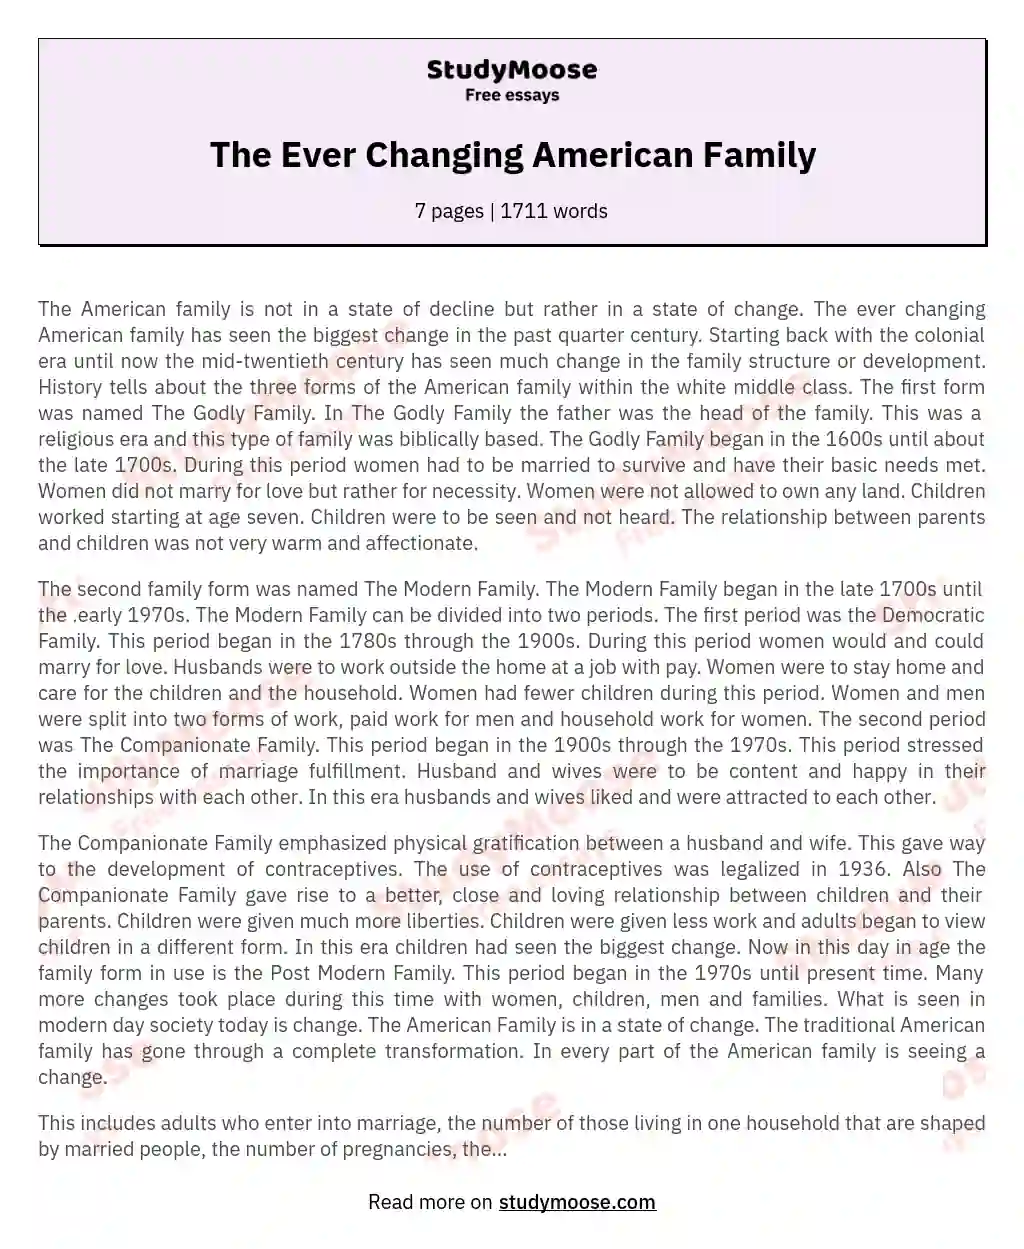 The Ever Changing American Family essay